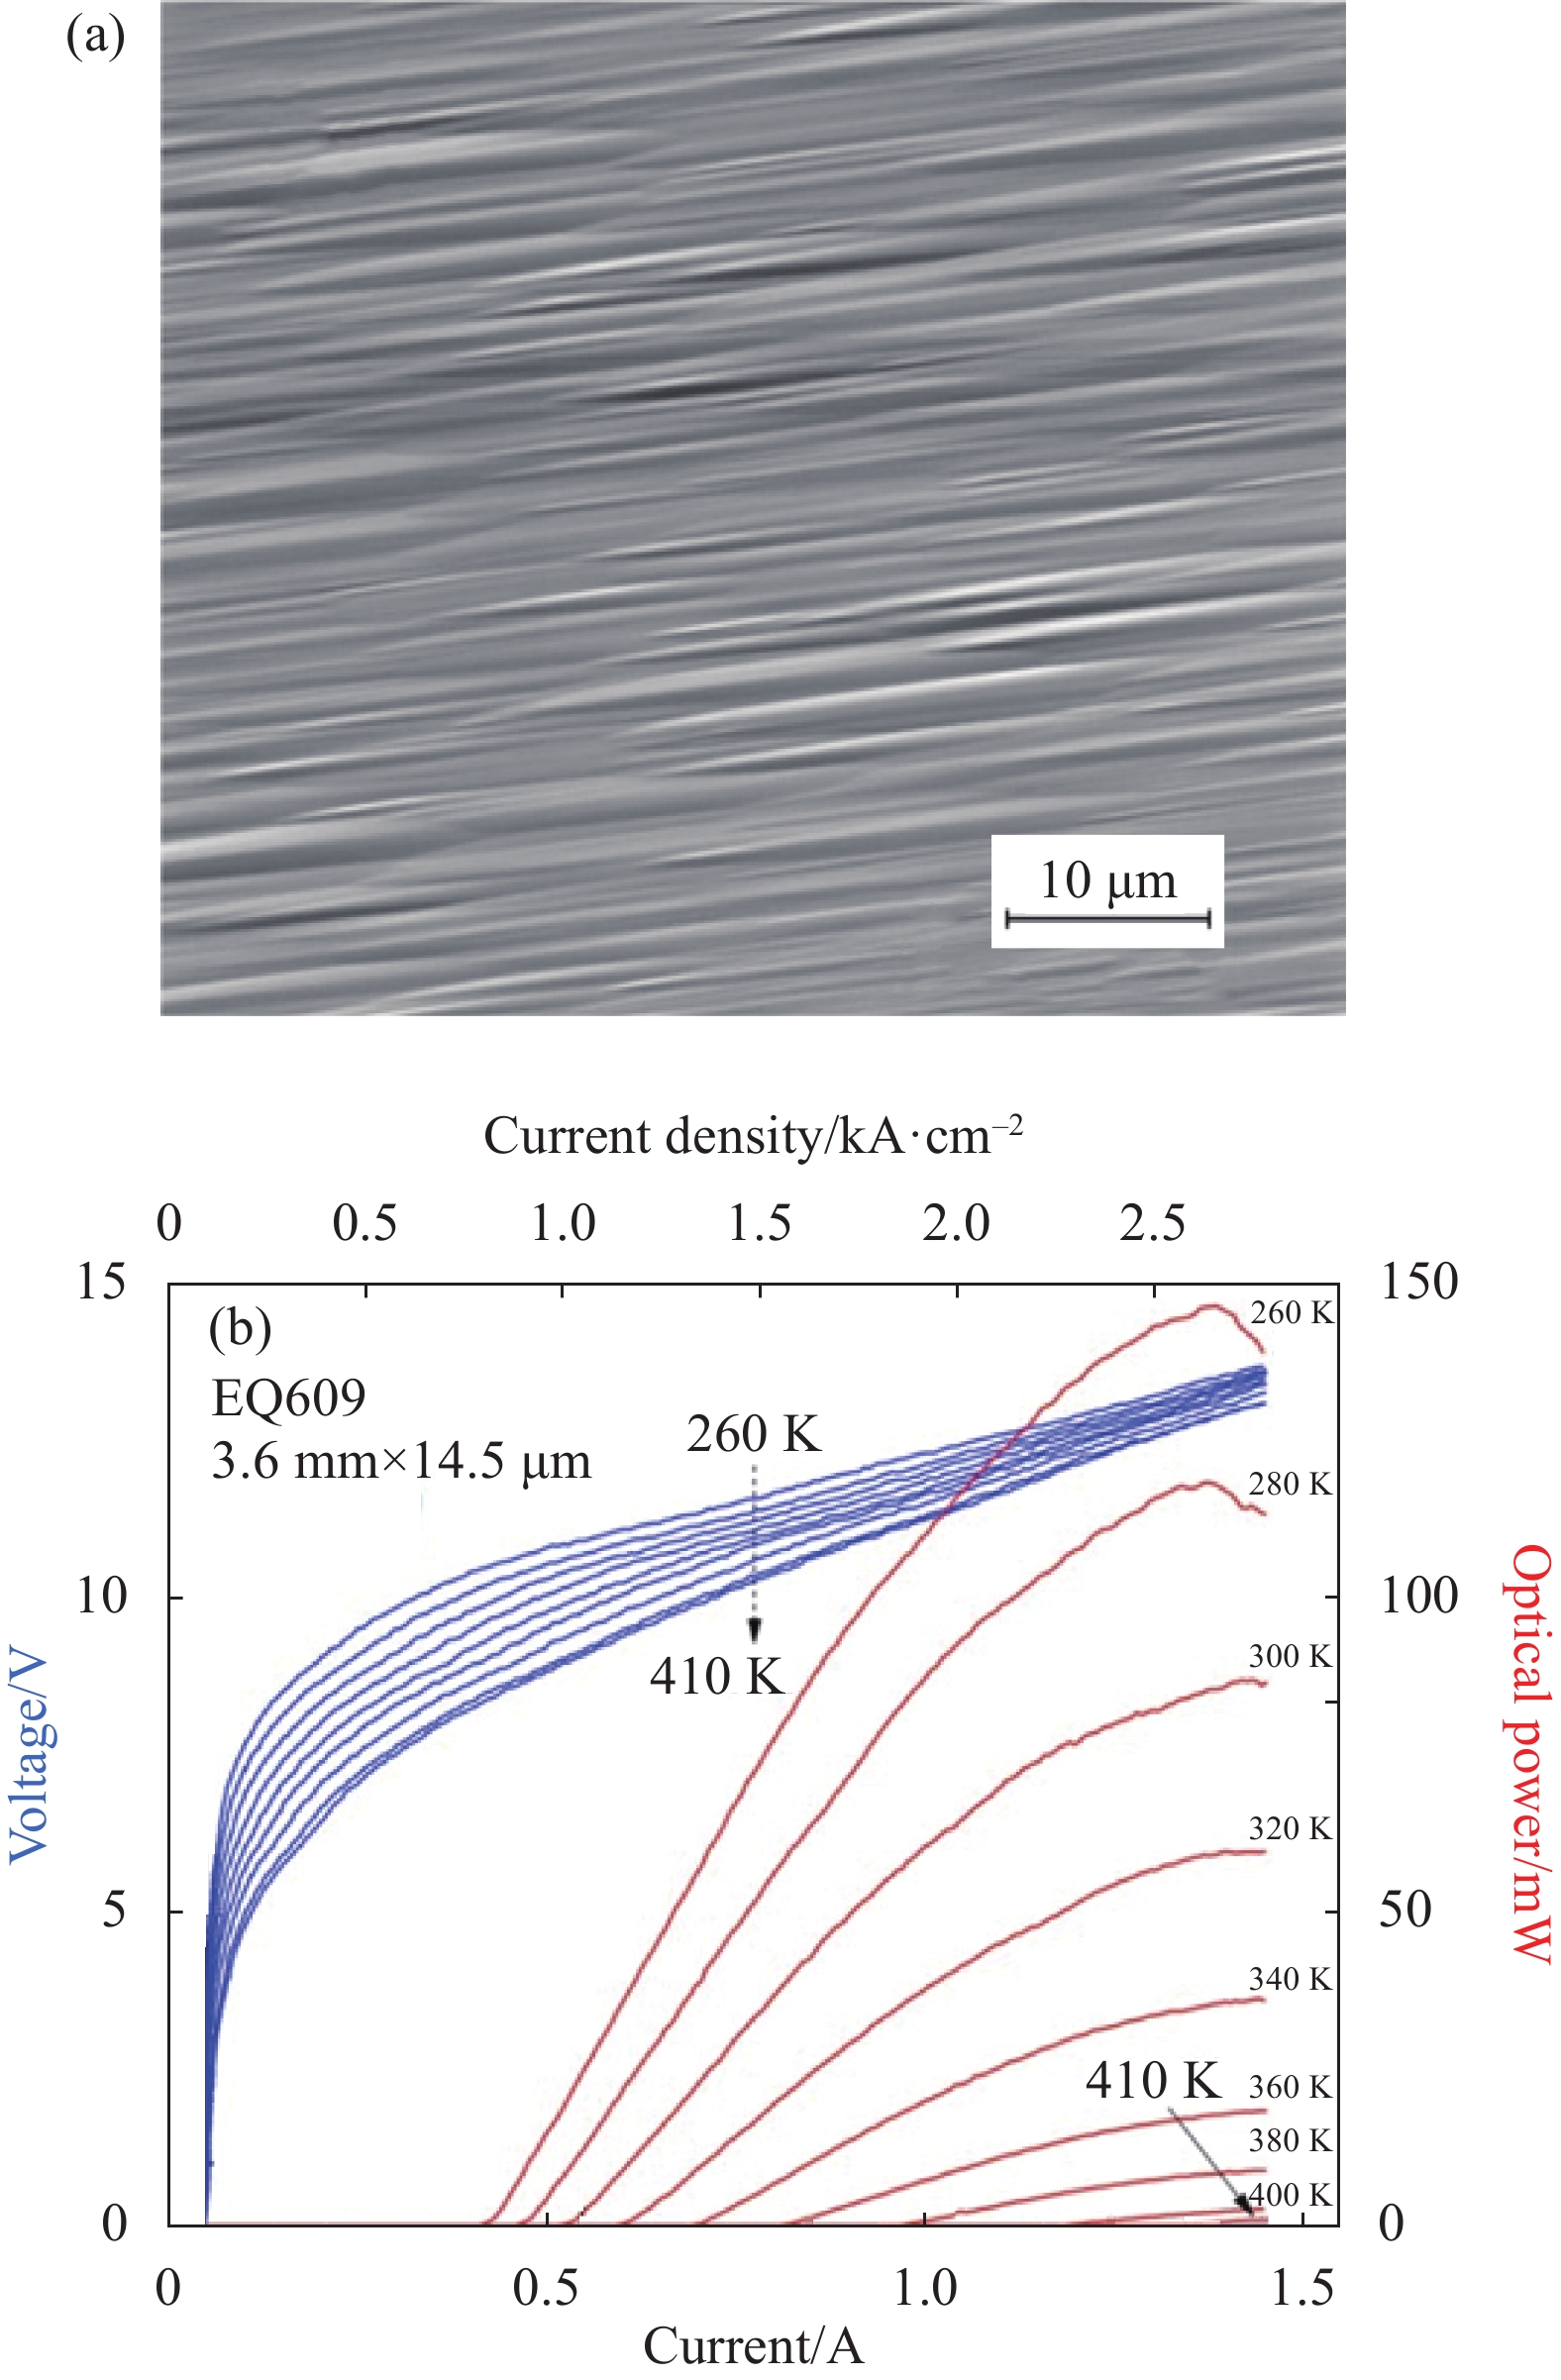 (a) Surface morphology of the QCL wafer grown on silicon substrate[18]; (b) LIV characteristics of a QCL device grown on silicon substrate[18]